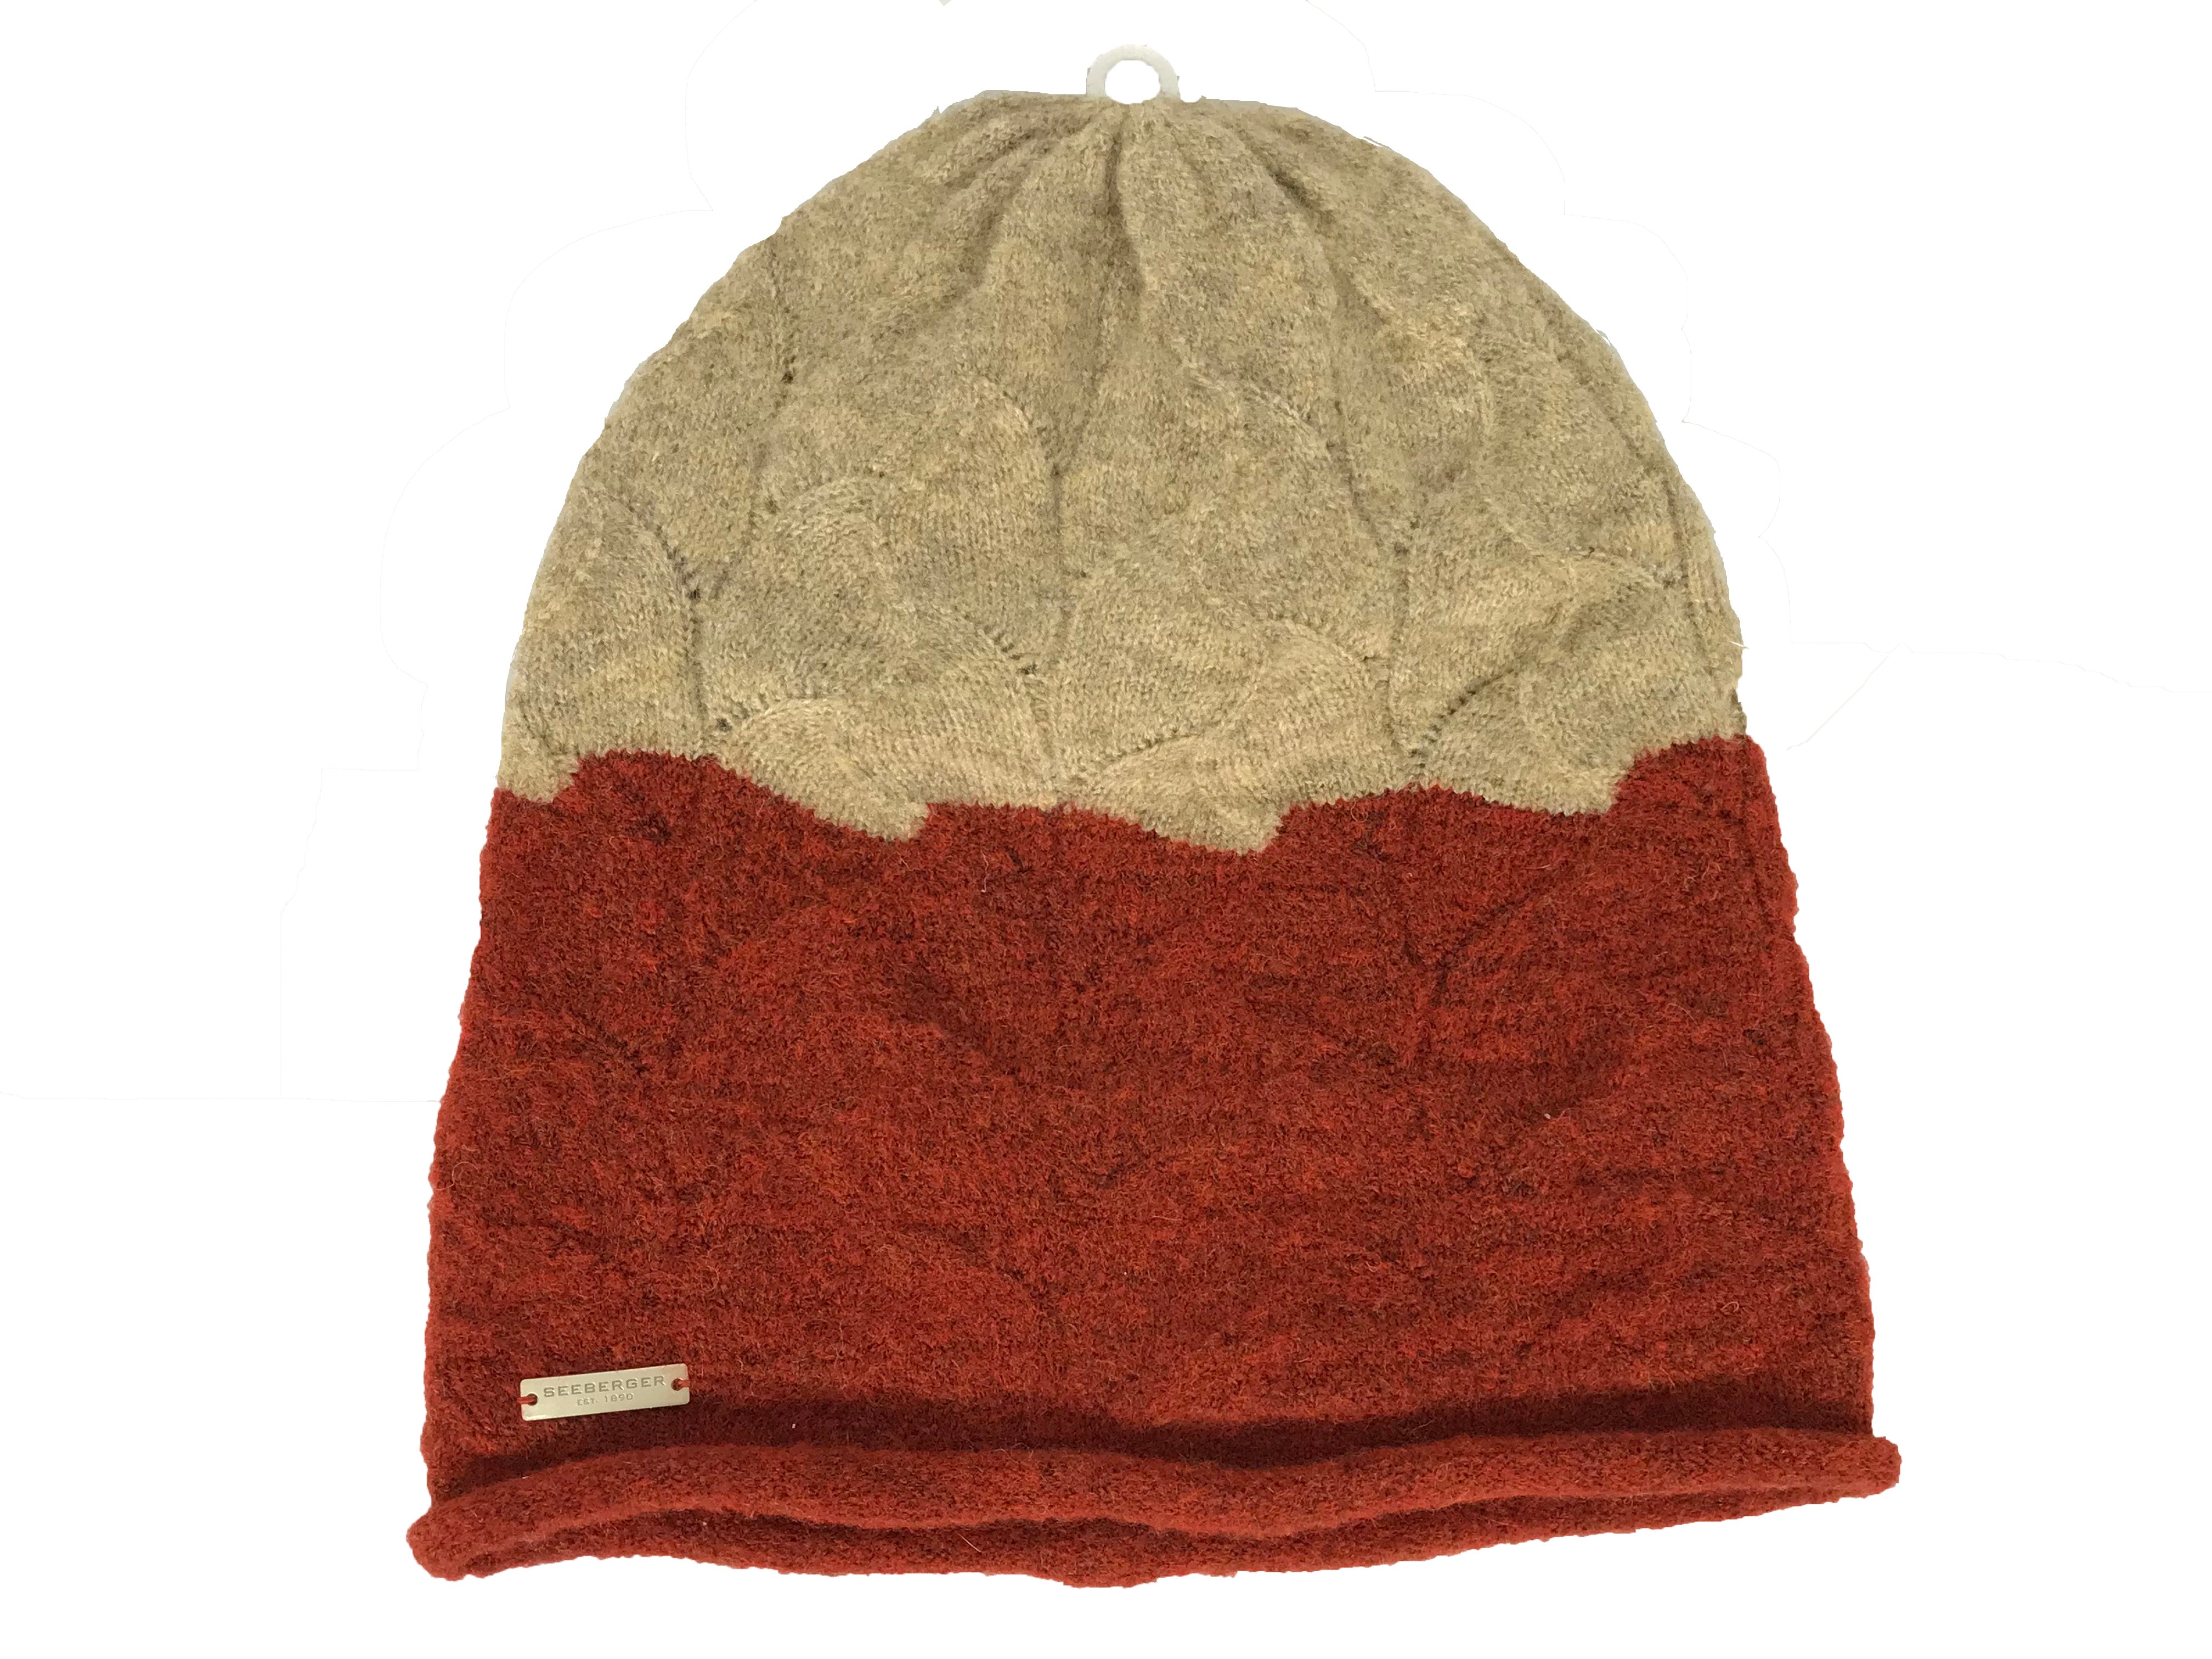 Seeberger Red and Tan Knit Beanie